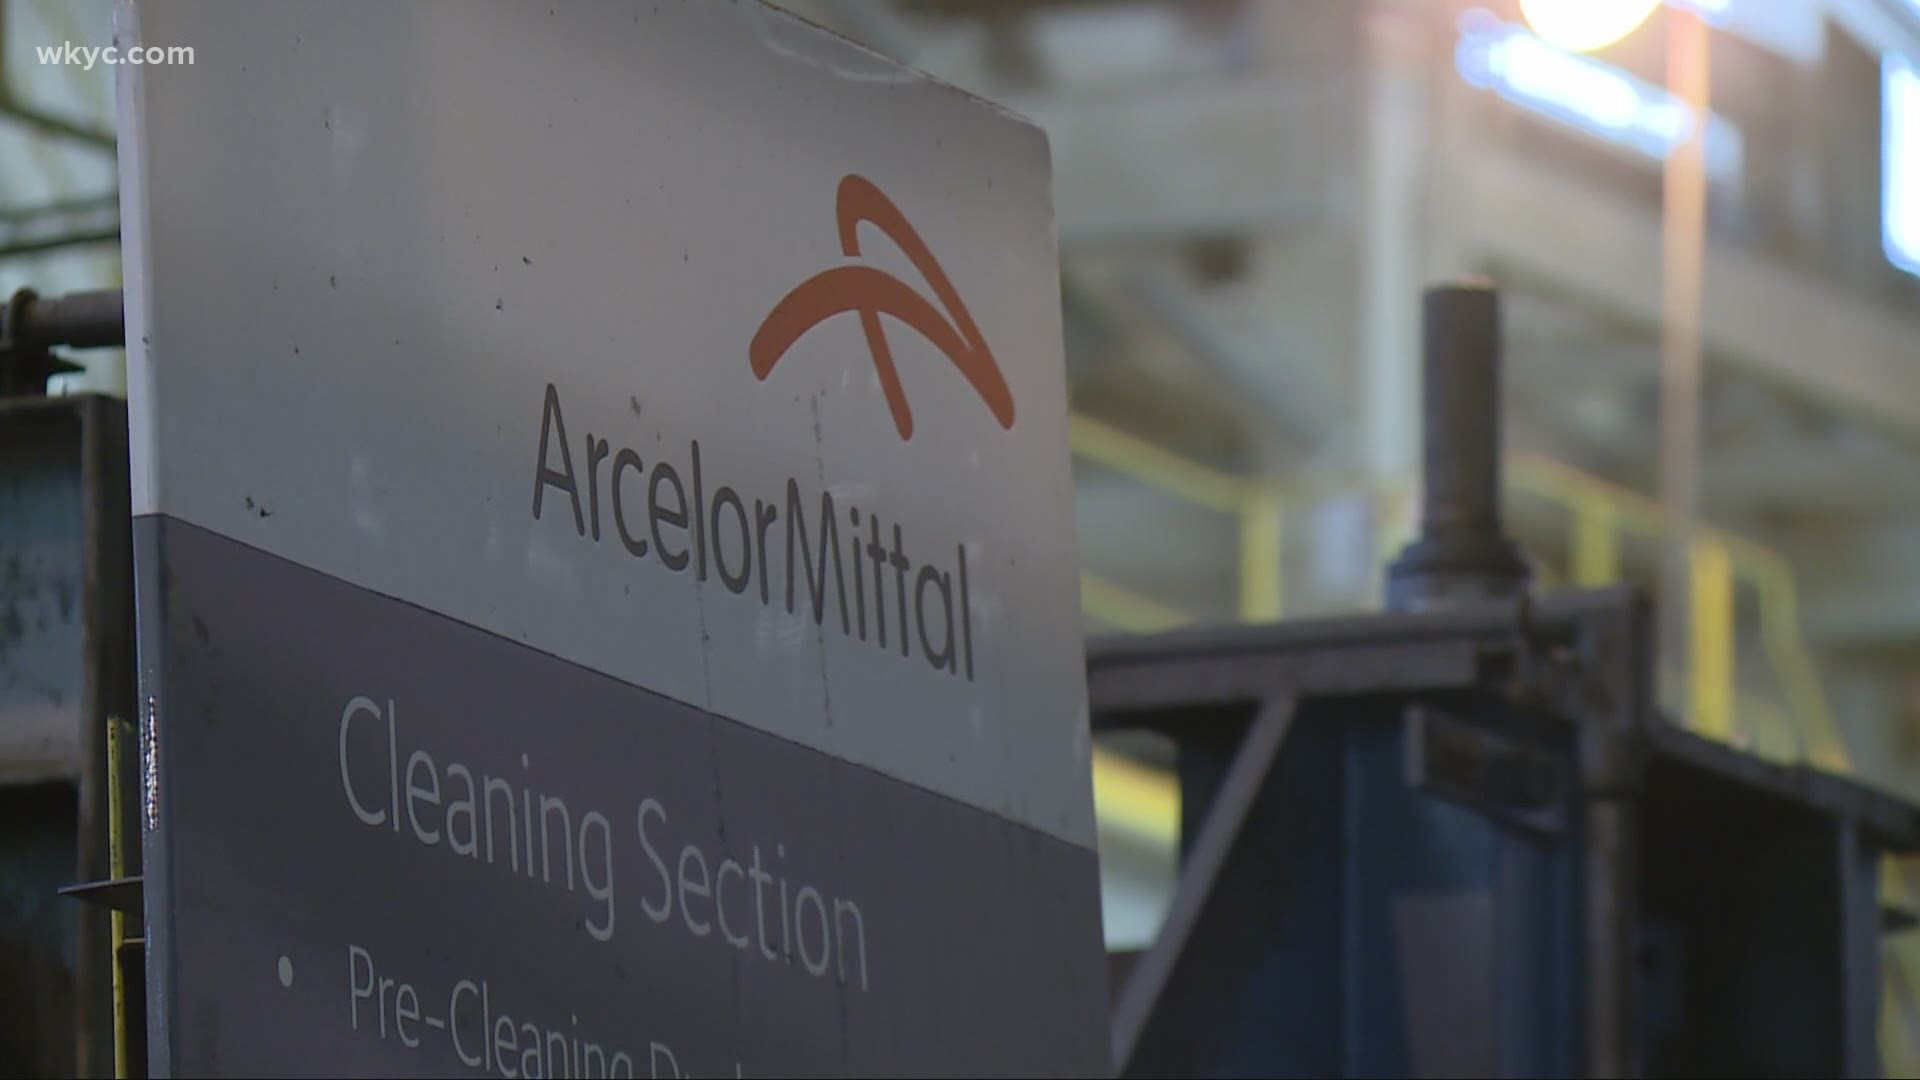 Sept. 28, 2020: ArcelorMittal USA, one of the largest steelmakers in the country, is set to be acquired by Cleveland-Cliffs Inc. It's a $1.4 billion deal.